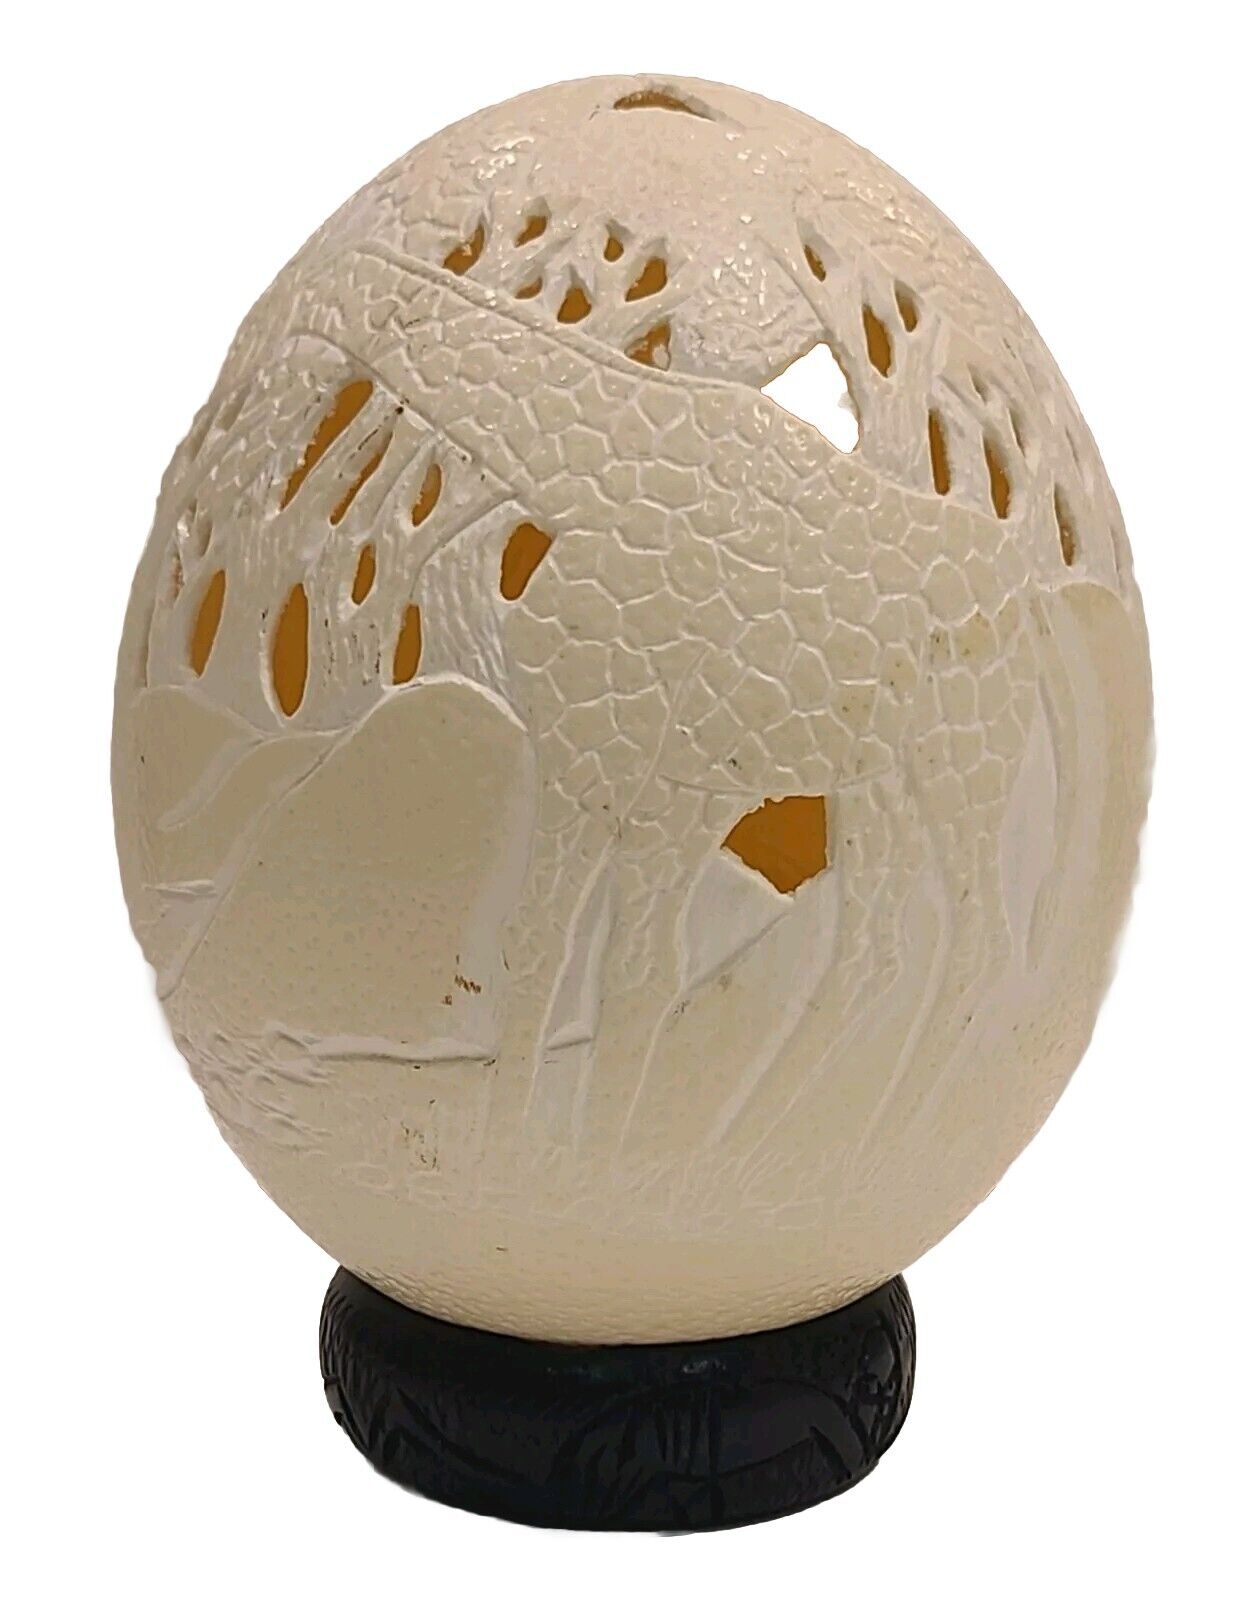 Hand-Carved Signed Ostrich Egg Safari Giraffes African & Wooden Stand